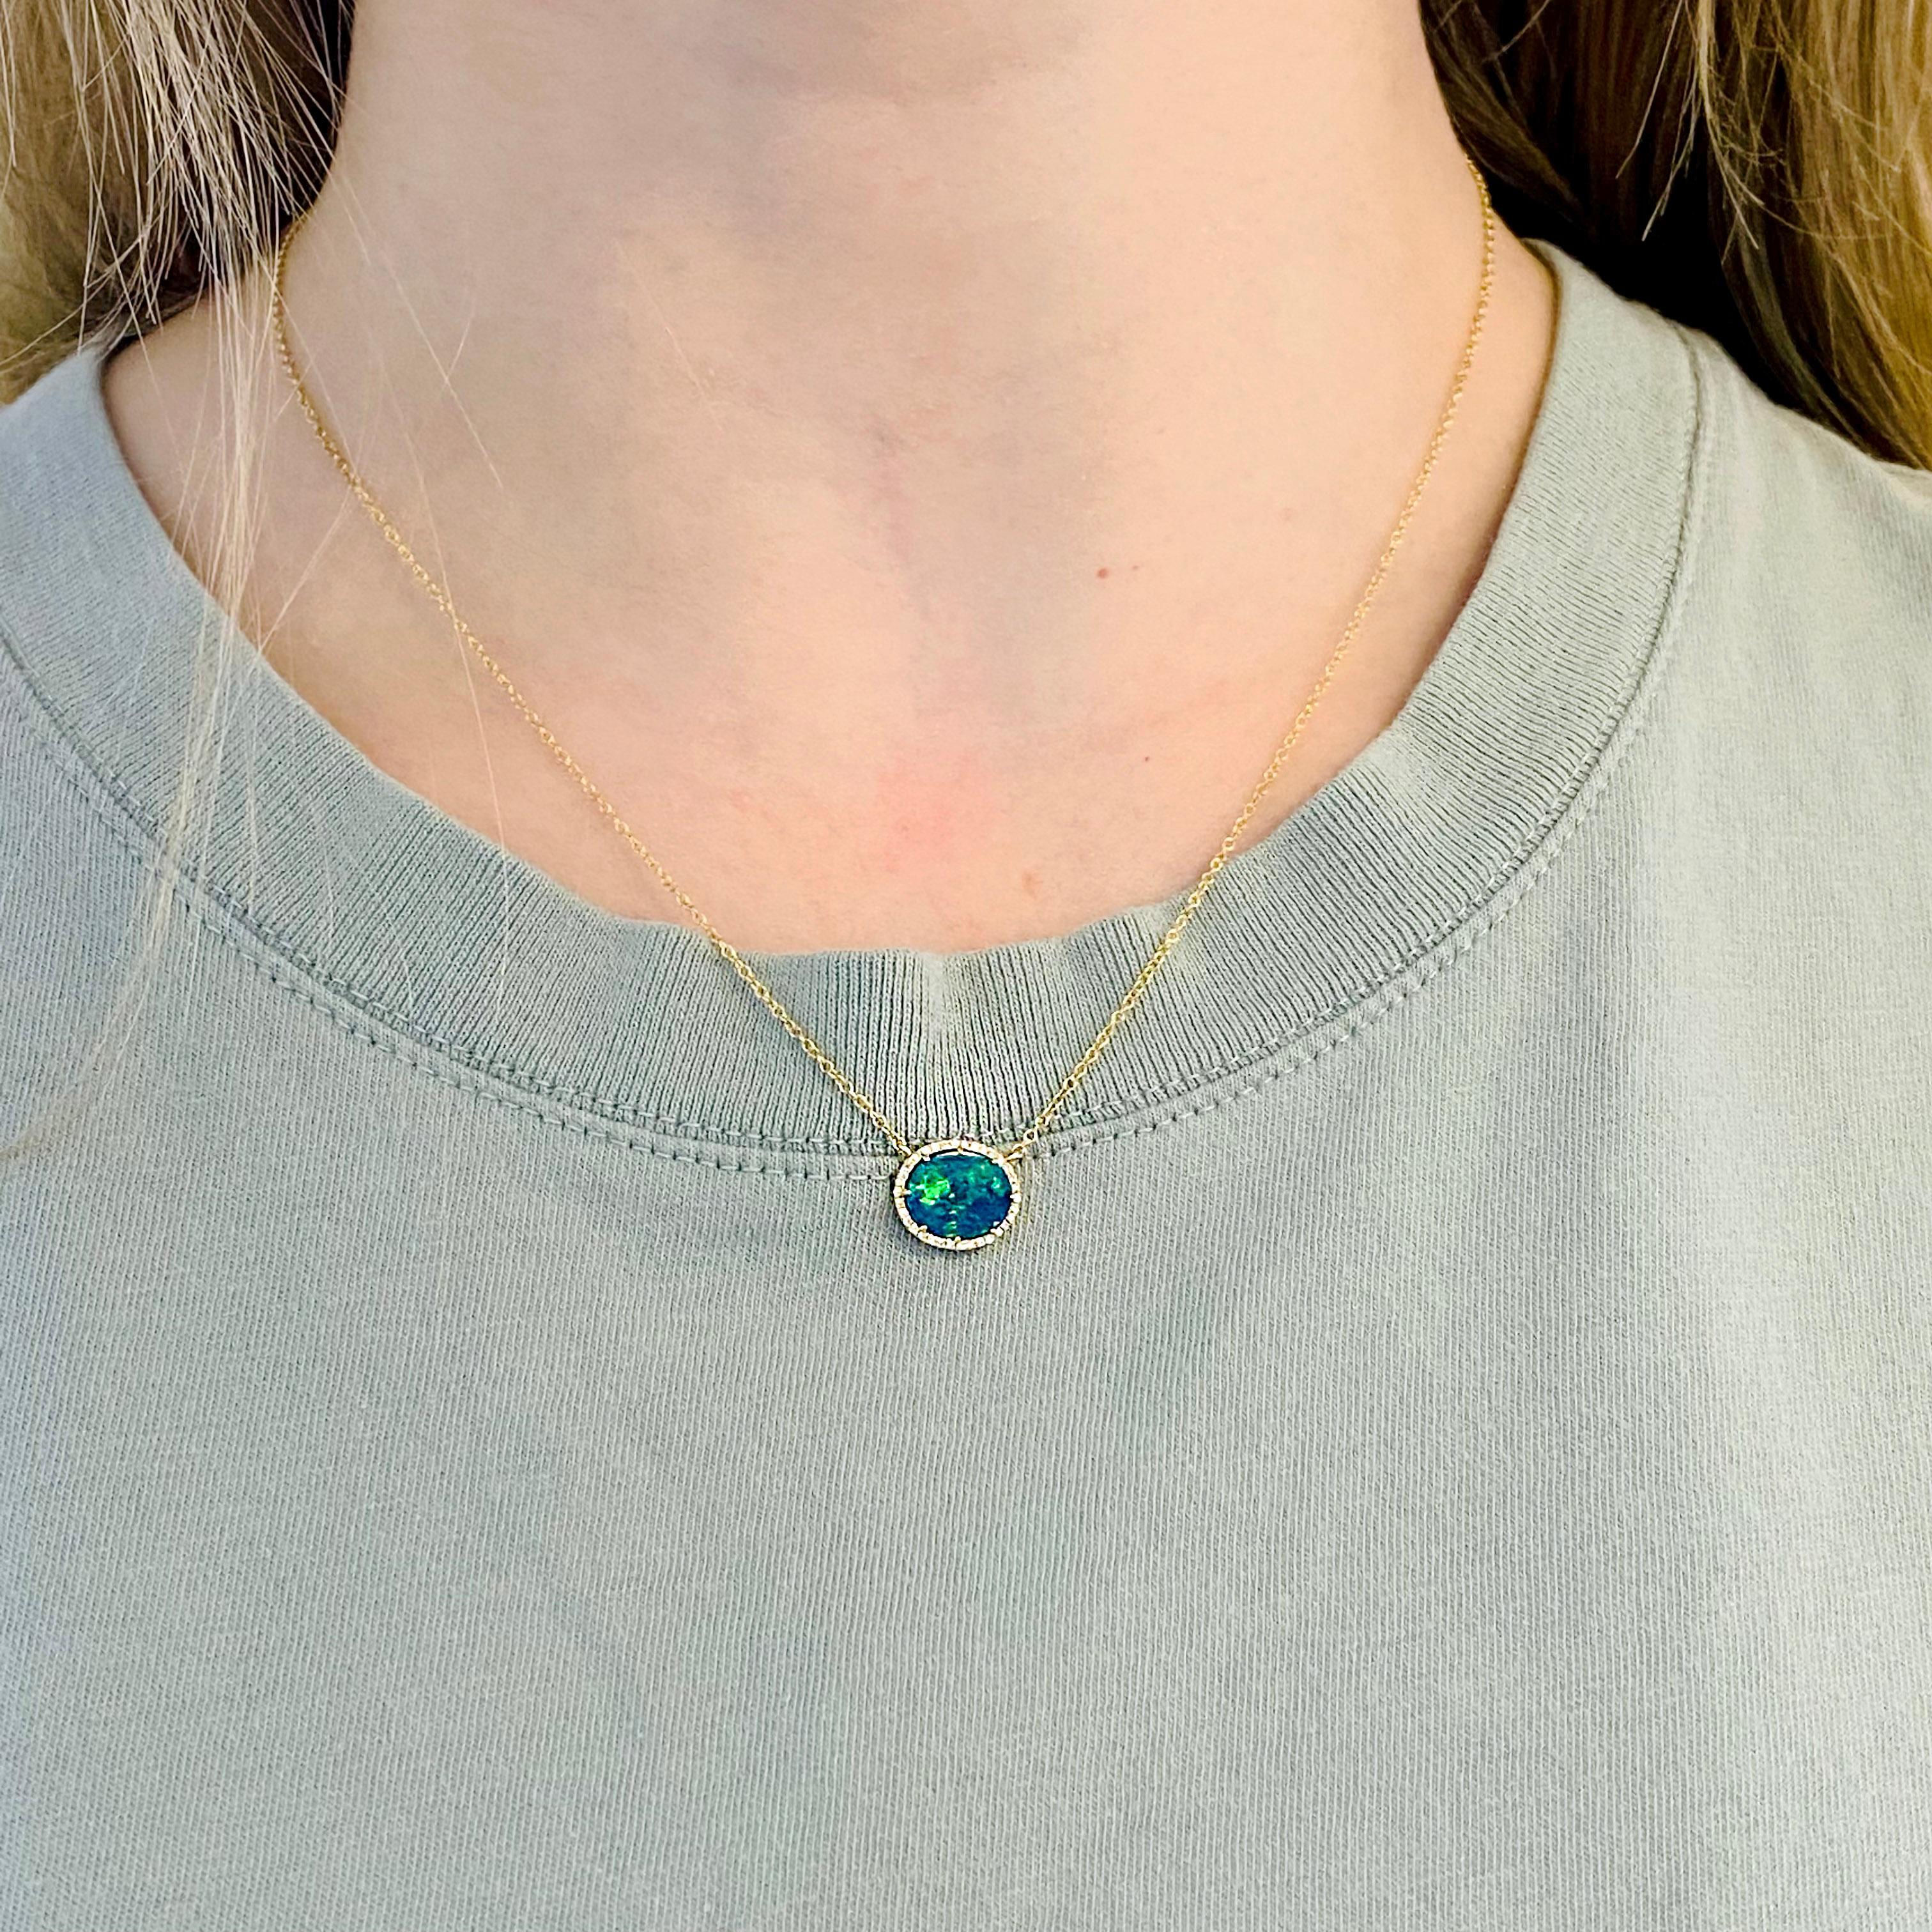 The genuine natural blue opal is stunning on anyone's neck.  The diamonds encircling the opal makes it even more intriguing.  Encircled with the 14 karat yellow gold the color of the natural opal really pops! The details for this beautiful necklace